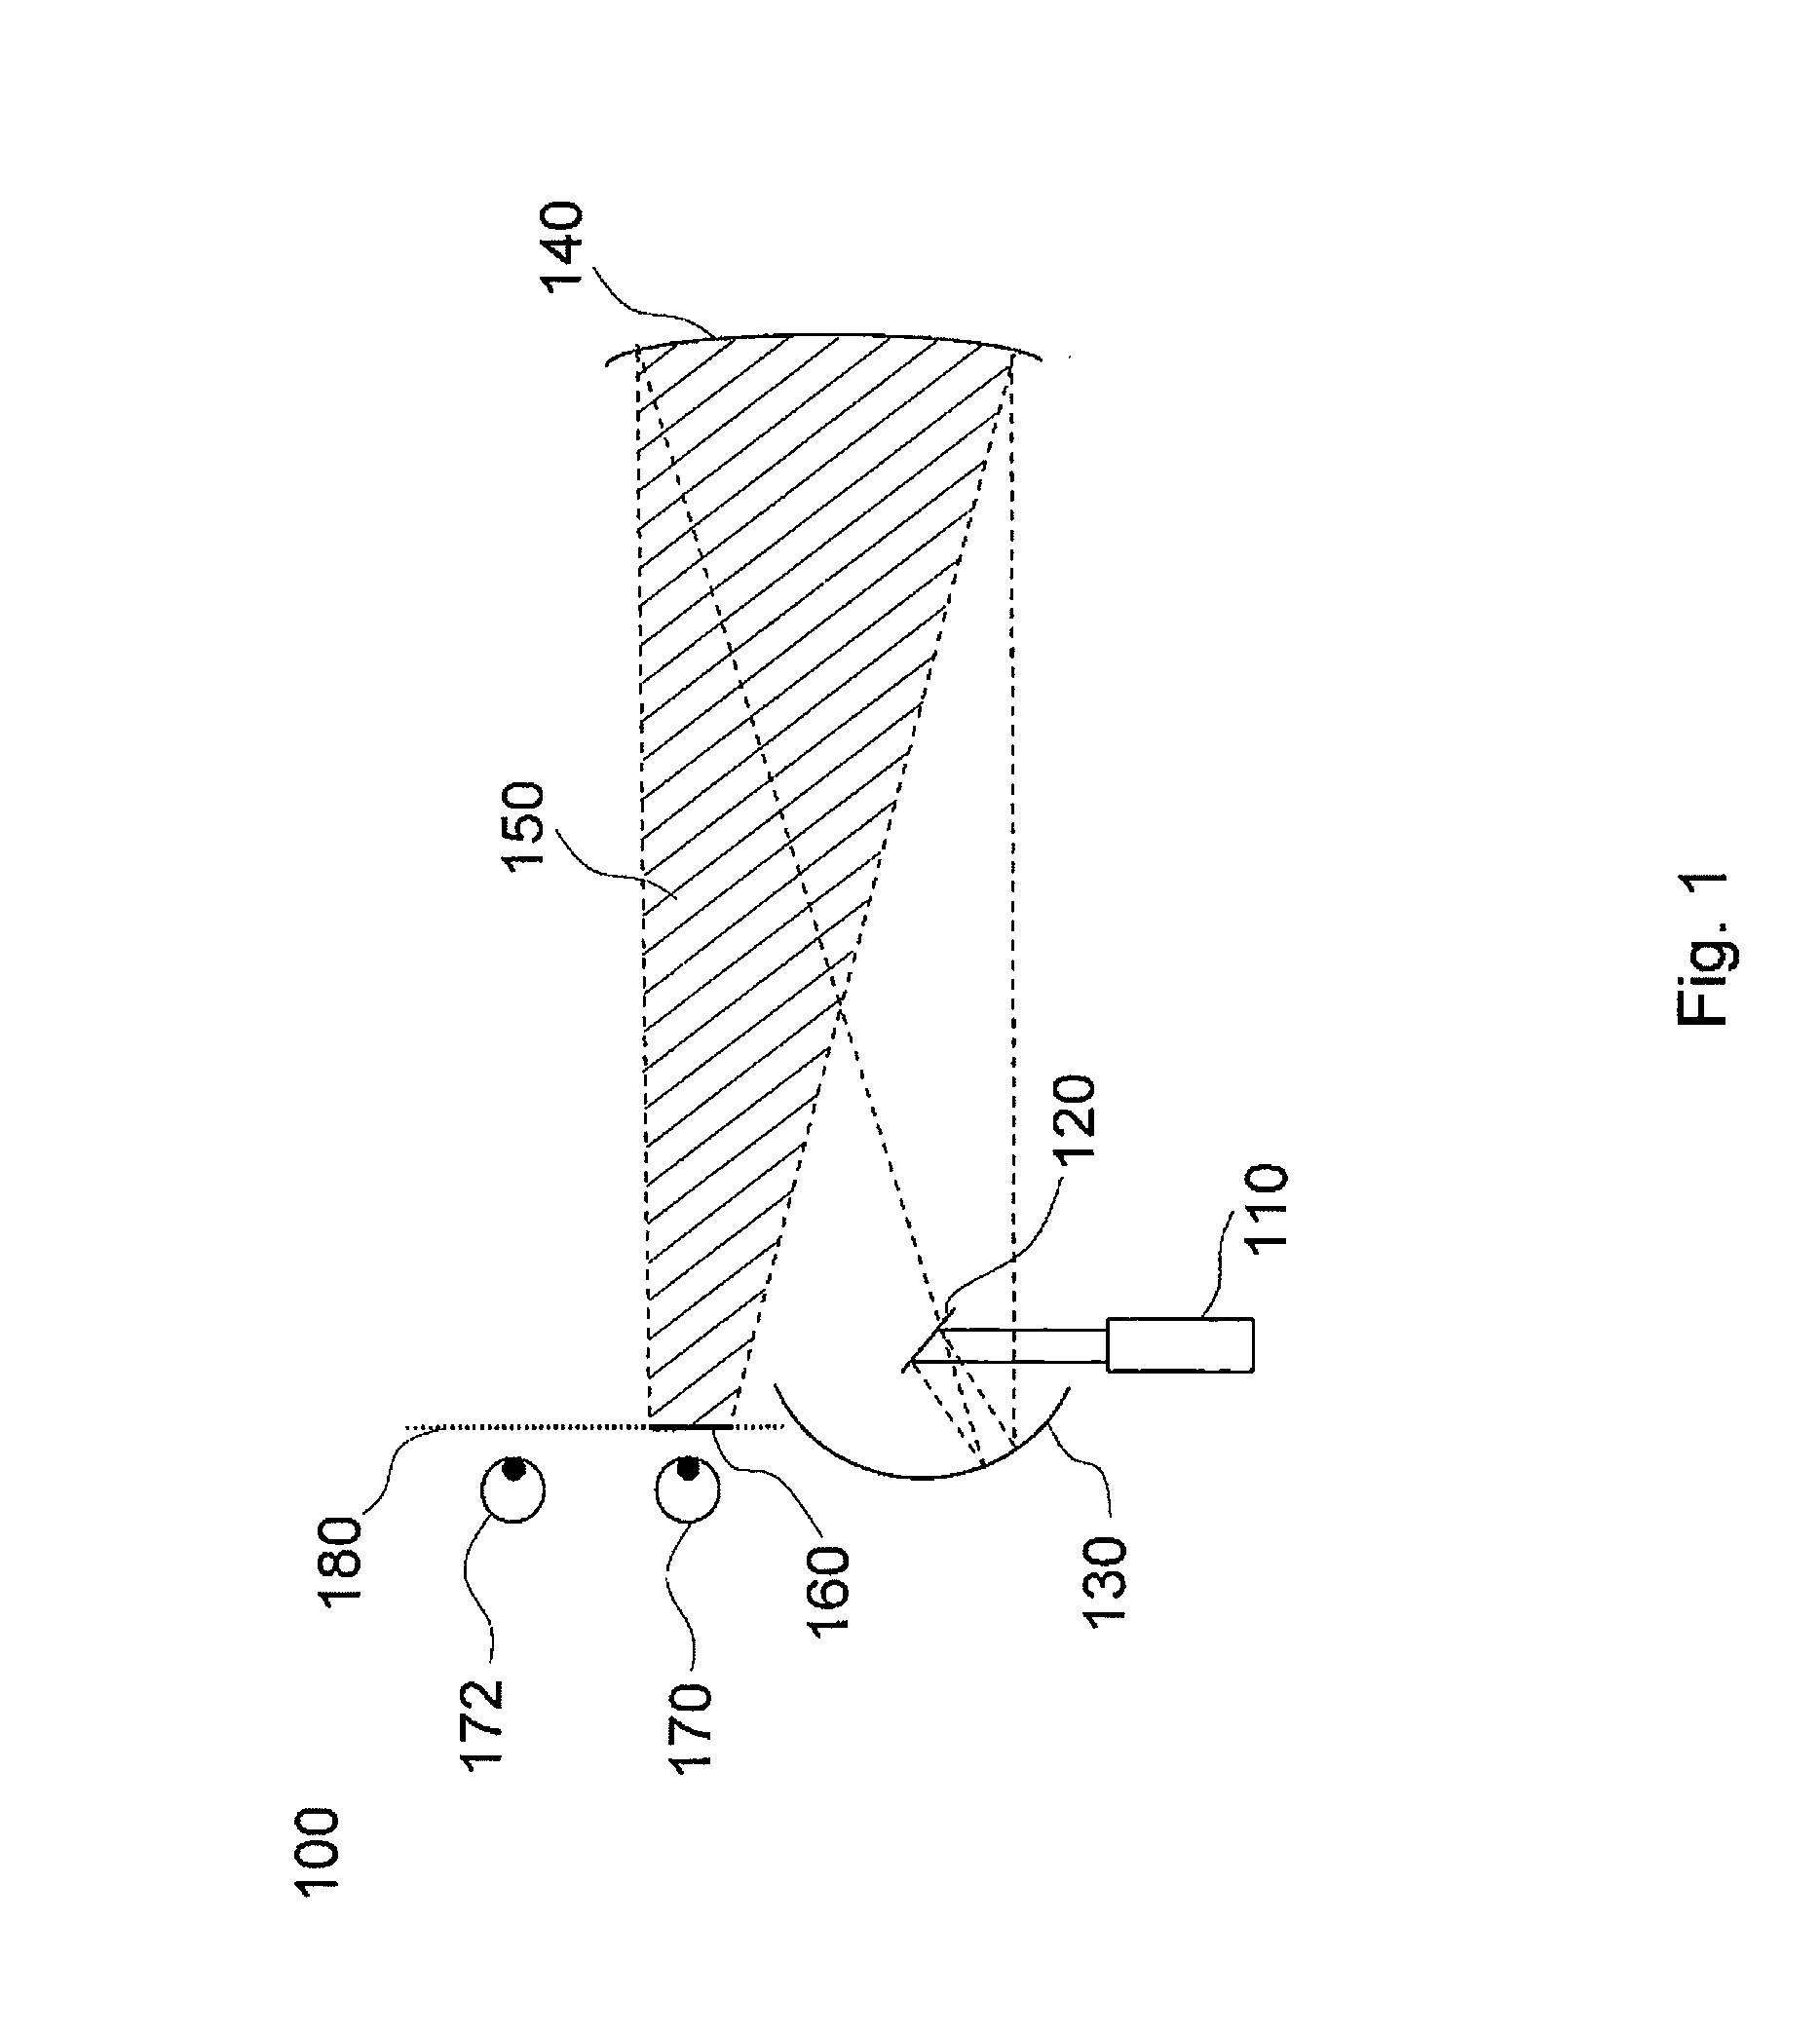 Holographic reconstruction system and method with an enlarged visibility region